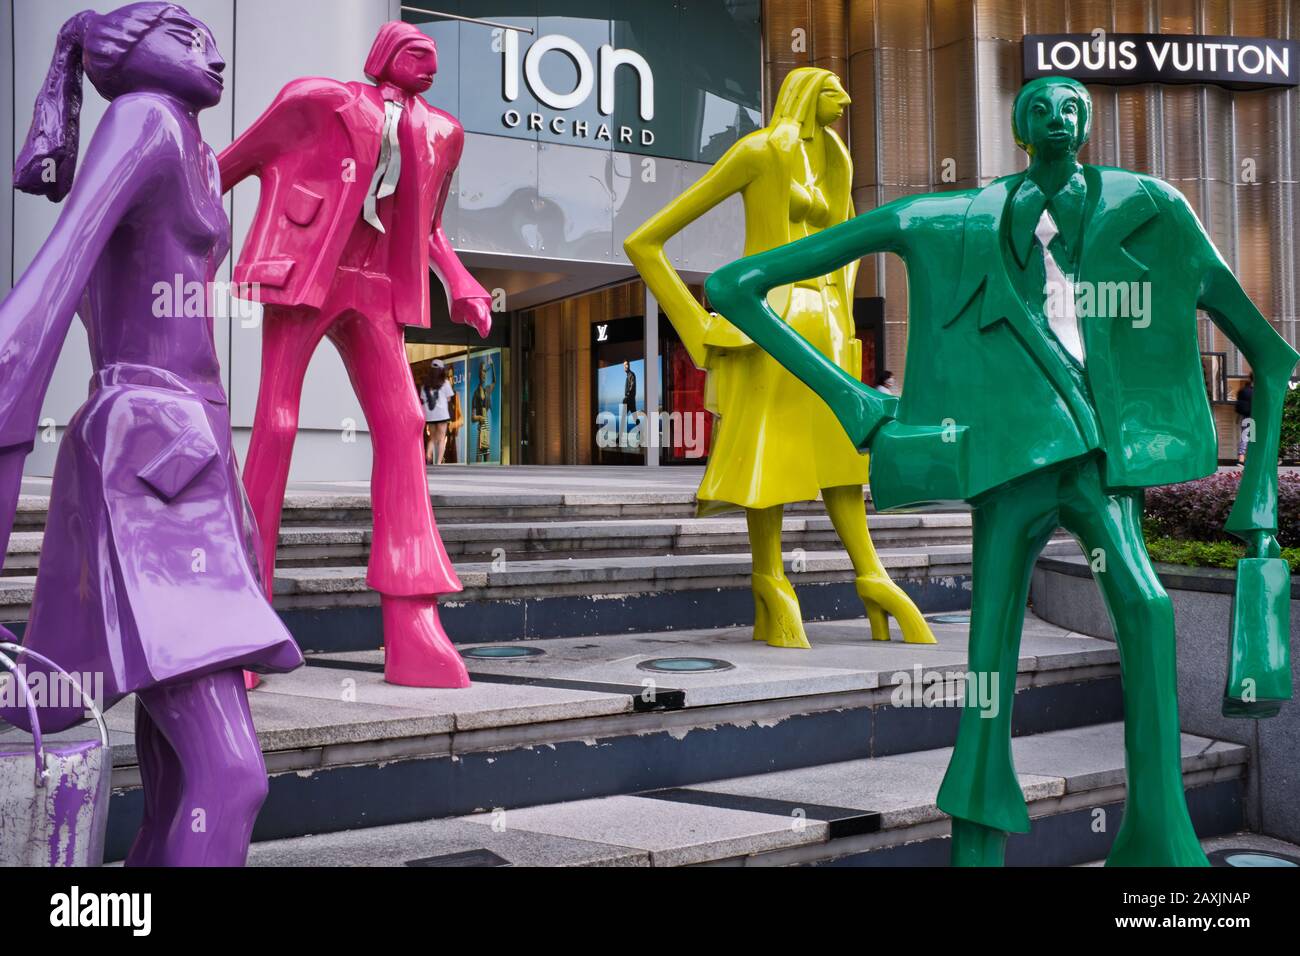 Louis Vuitton  Window display at ION Orchard, Orchard Road